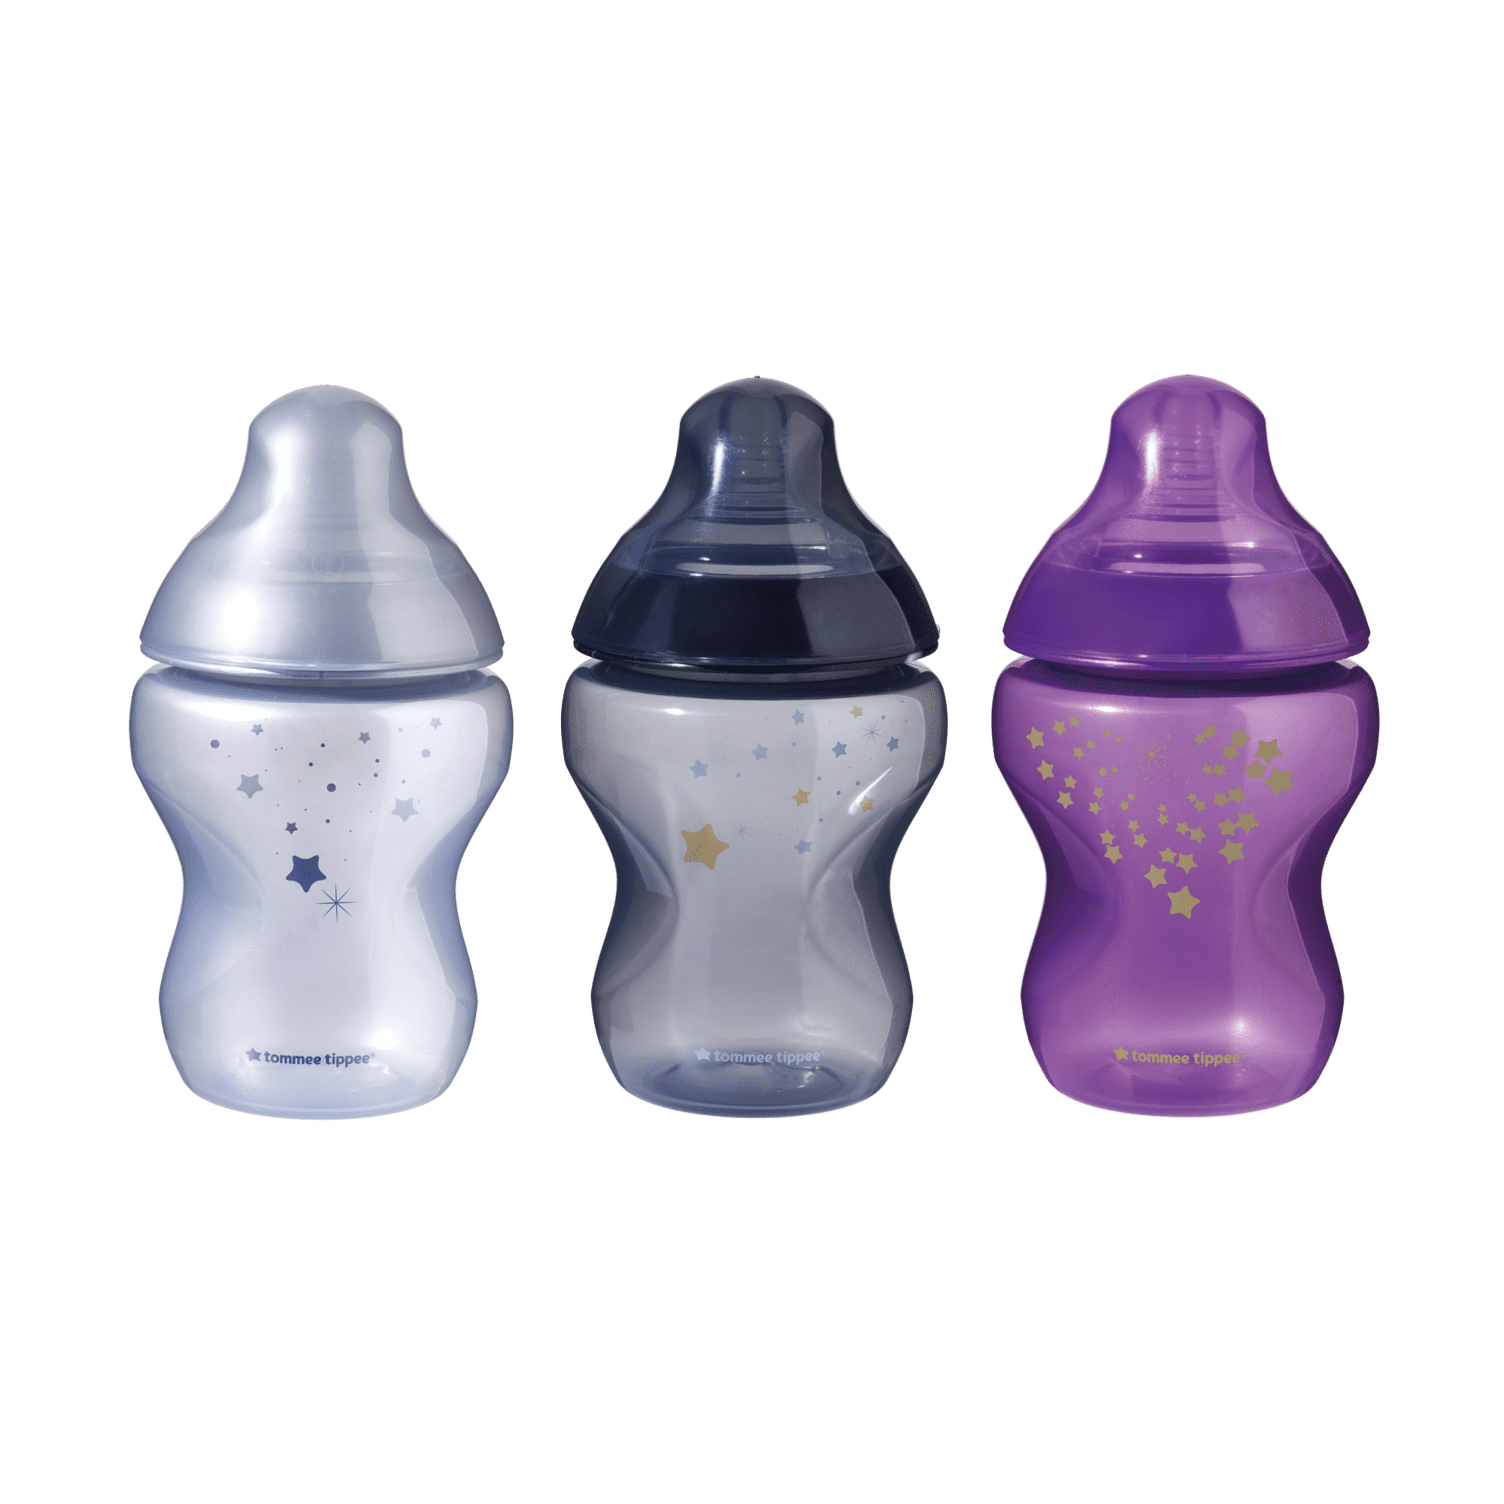 Tommee Closer to Nature Limited Edition 'Midnight Skies' Bottles | Breast-Like Nipple, Anti-Colic - 9-ounce, 3 Count Walmart.com